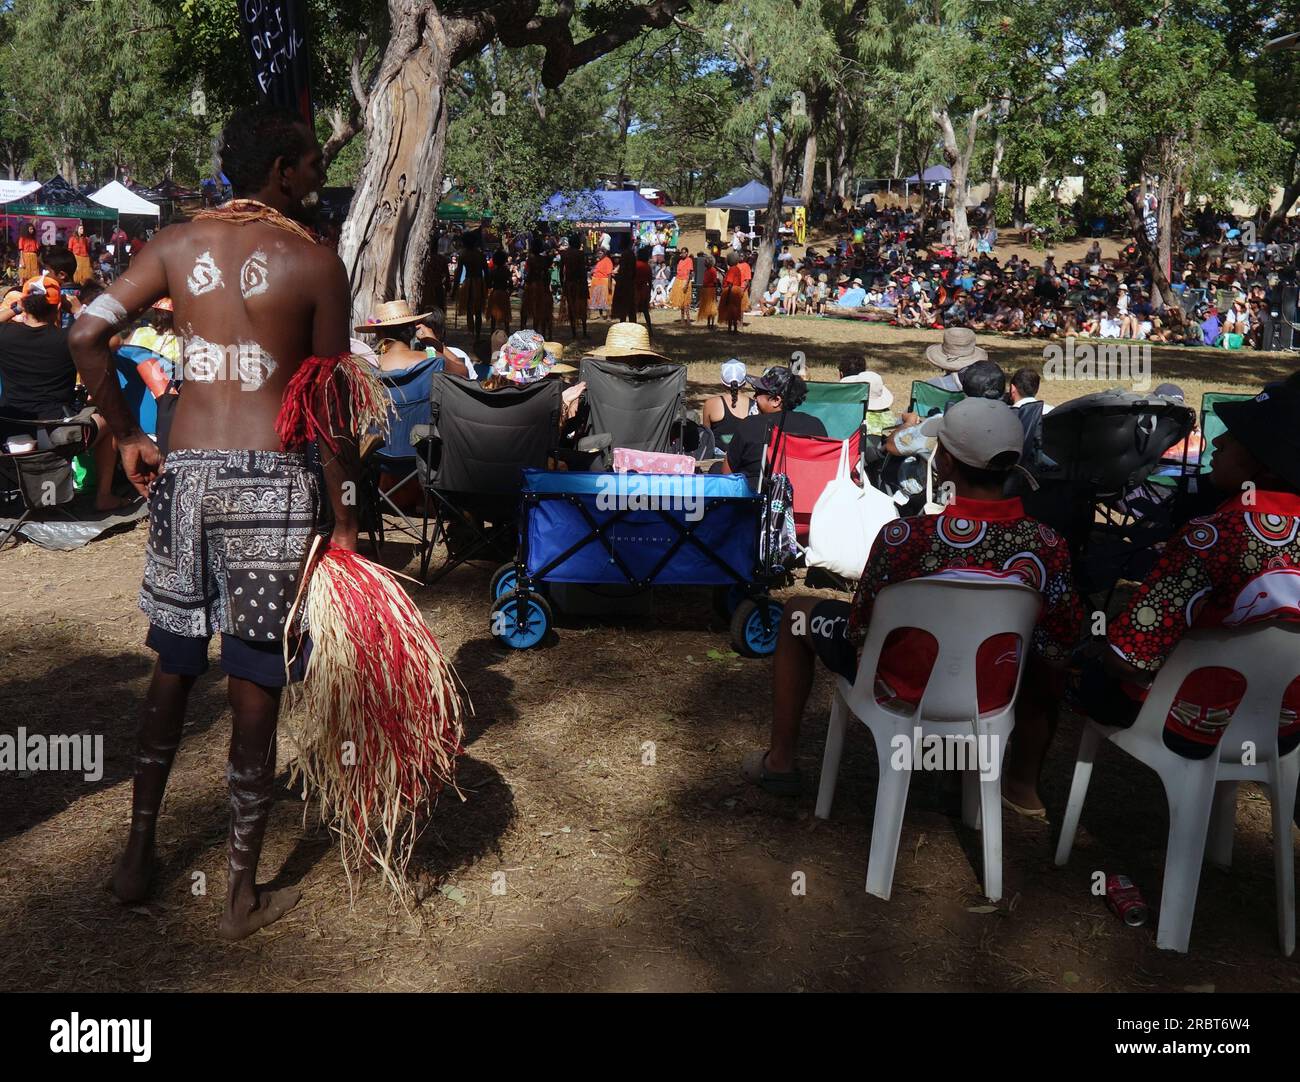 Dancer checking out the competition, Laura Quinkan Indigenous Dance Festival, Cape York Peninsula, Queensland, Australia, 2023. No MR or PR Stock Photo